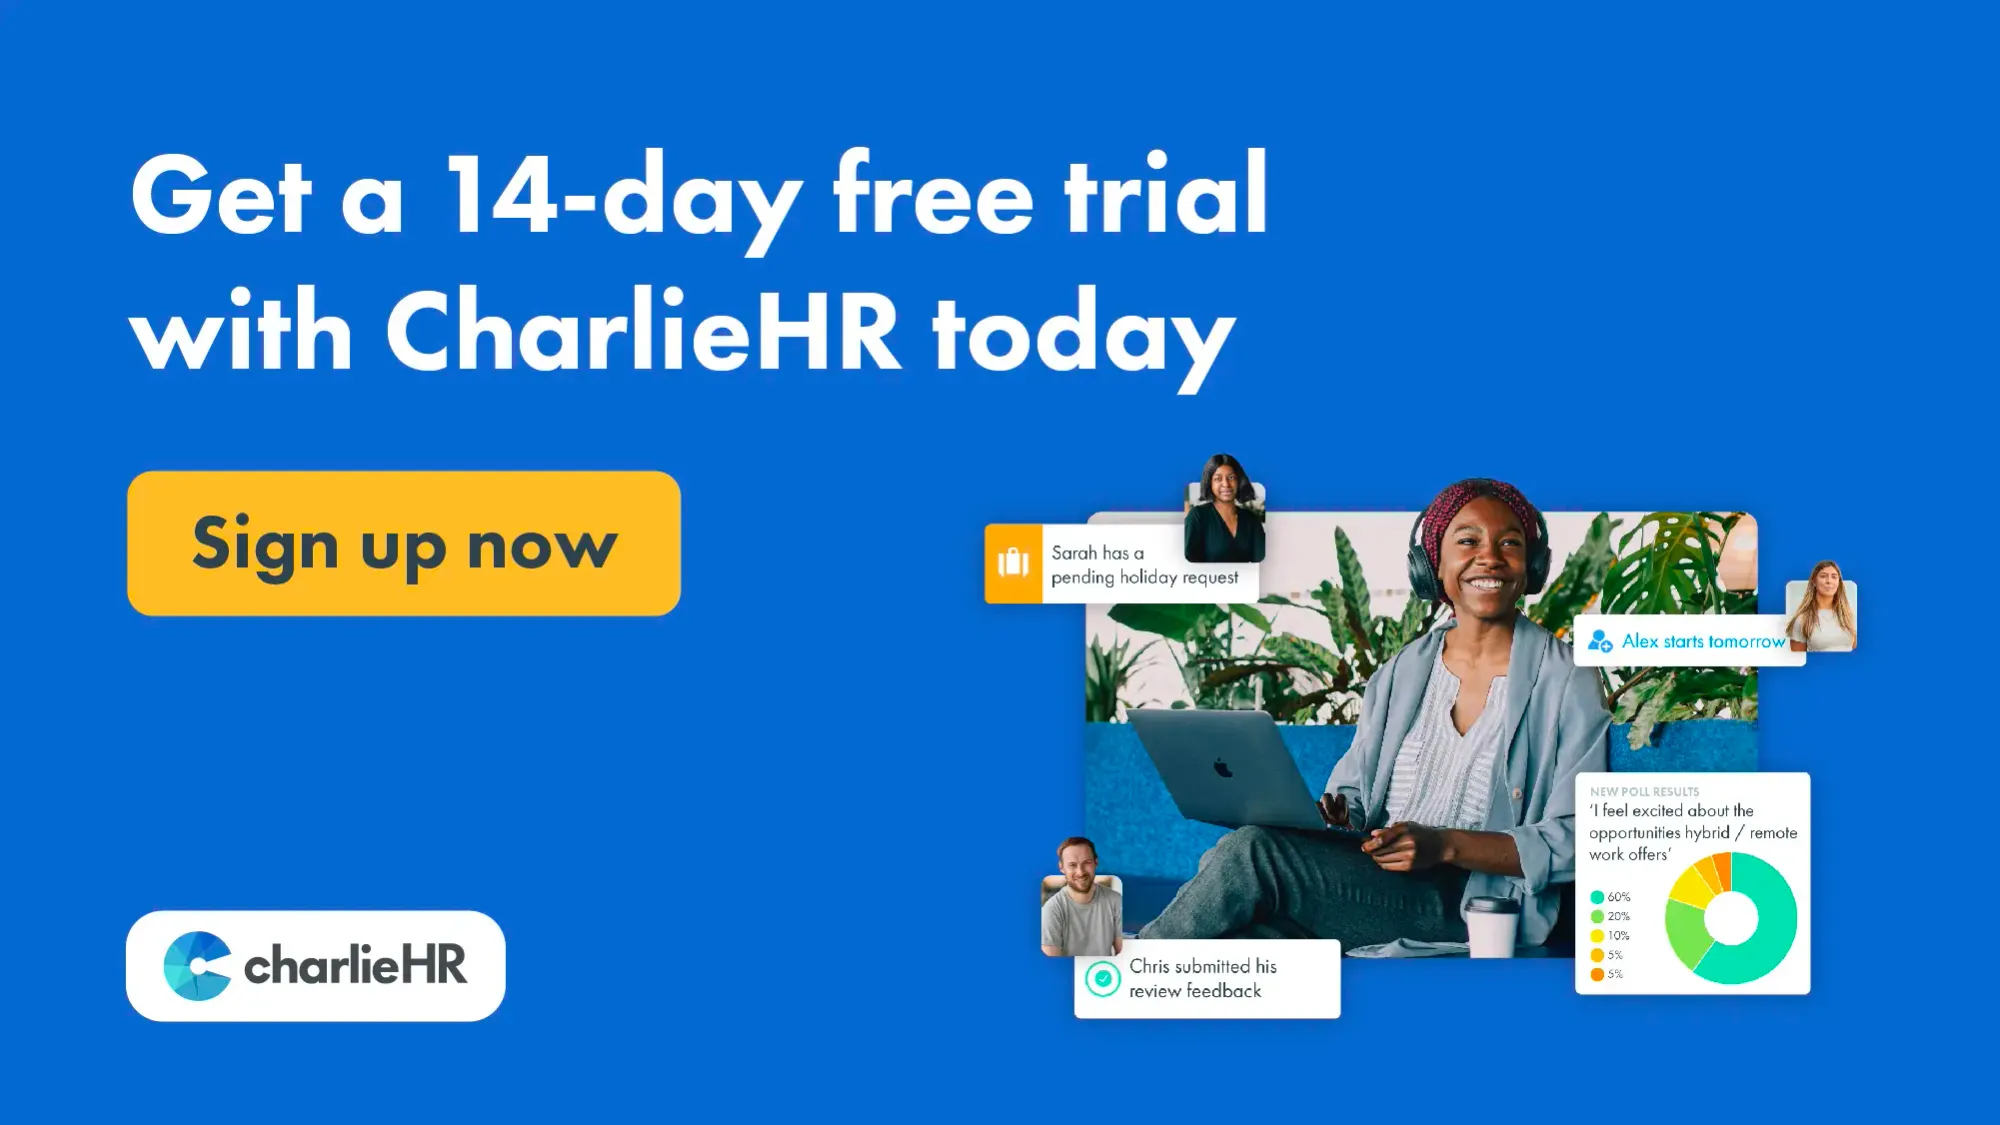 Start you 14 day trial with CharlieHR